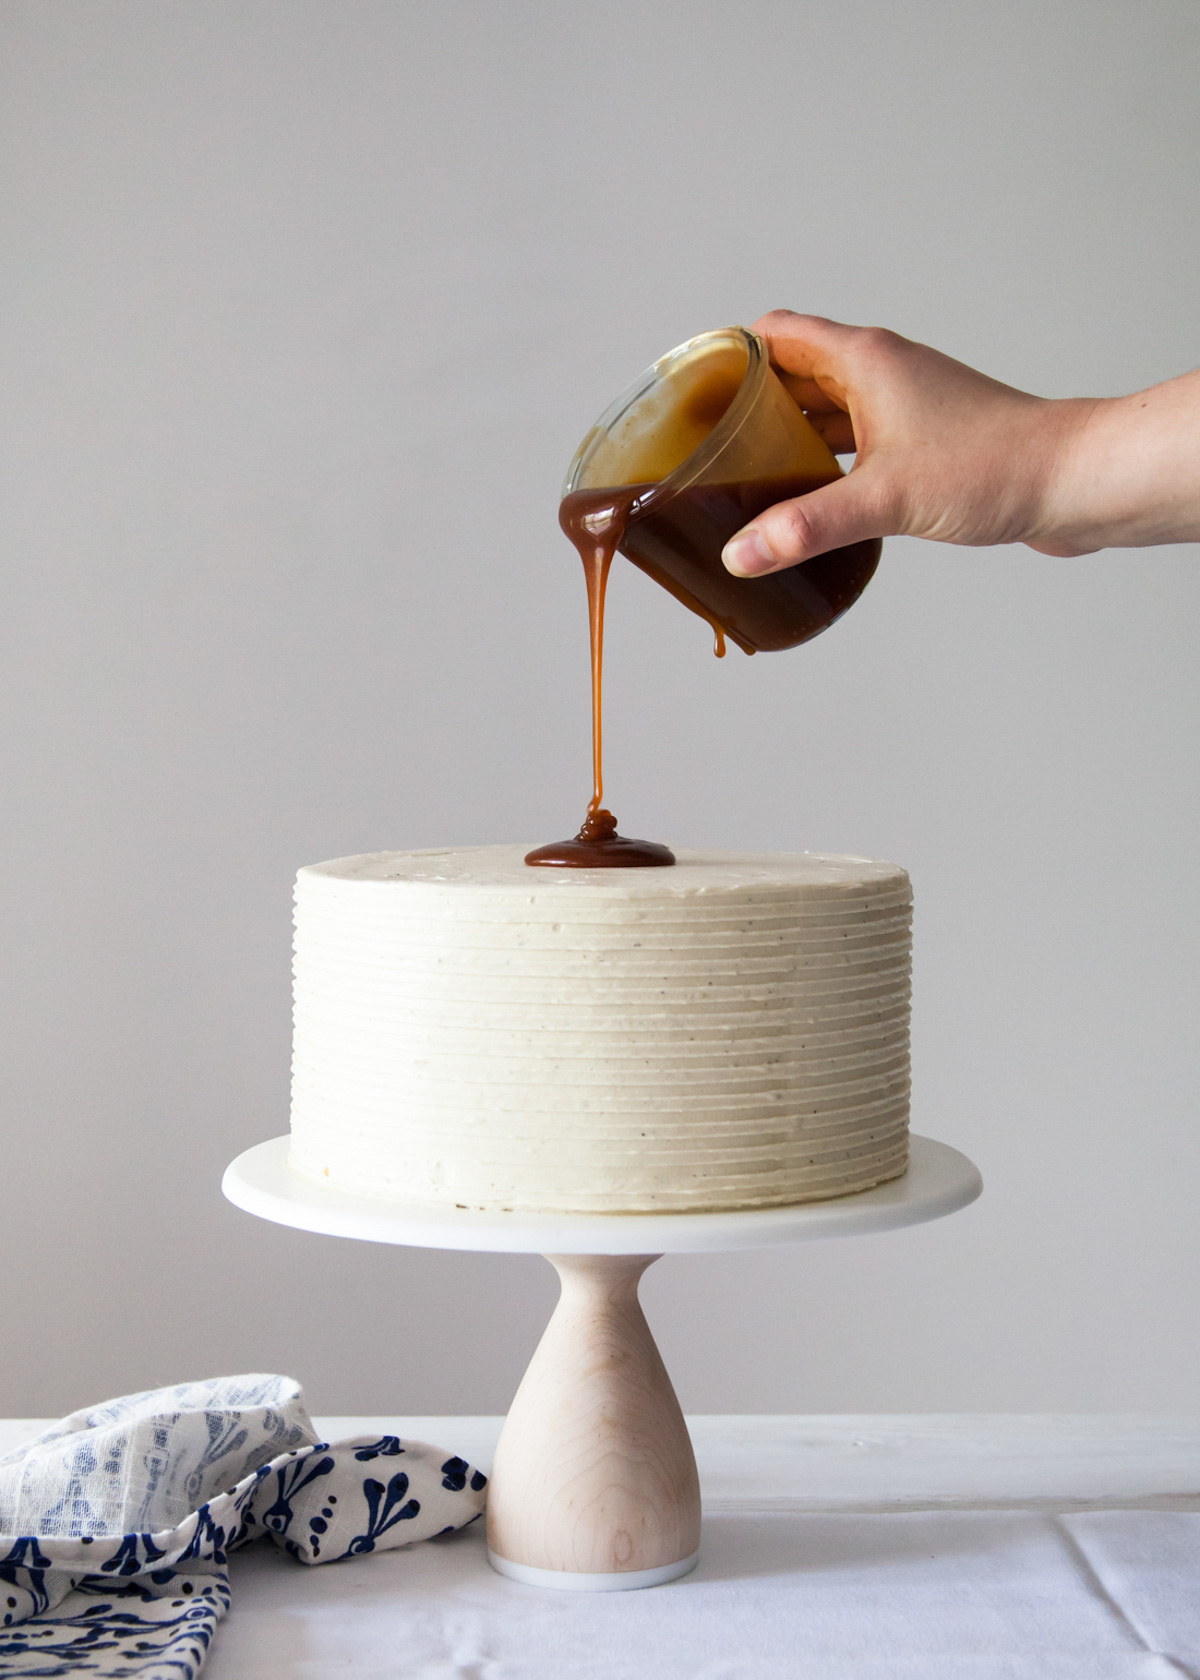 Pouring caramel sauce on a frosted London Fog cake